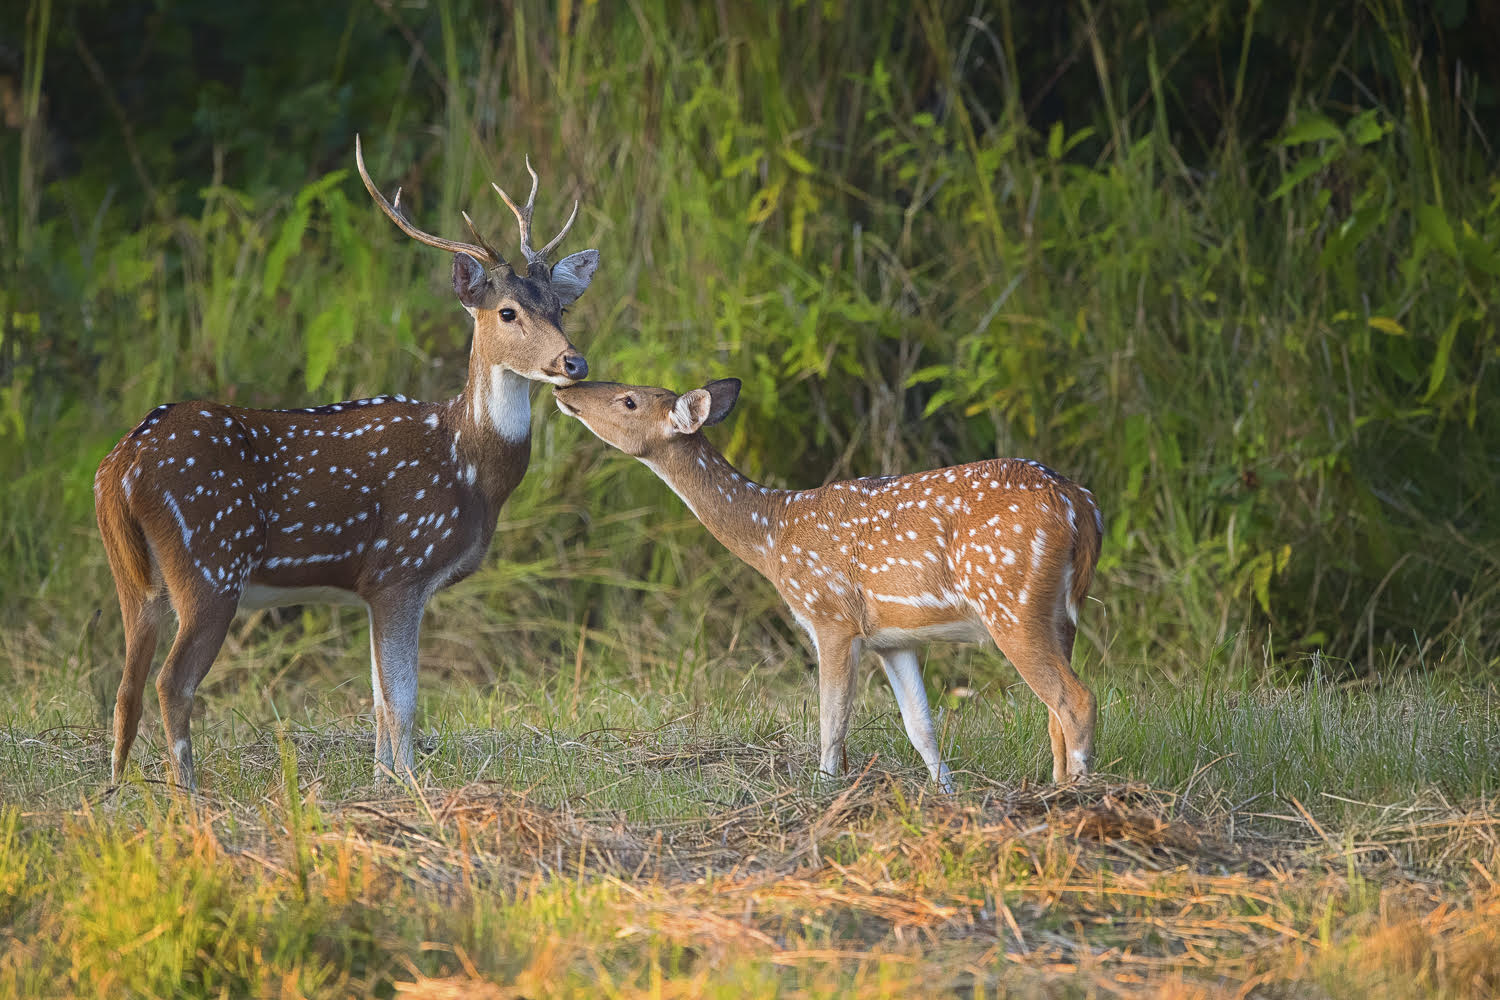 Spotted Deer - Courtesy of Fanny Lai and Bjorn Olesen